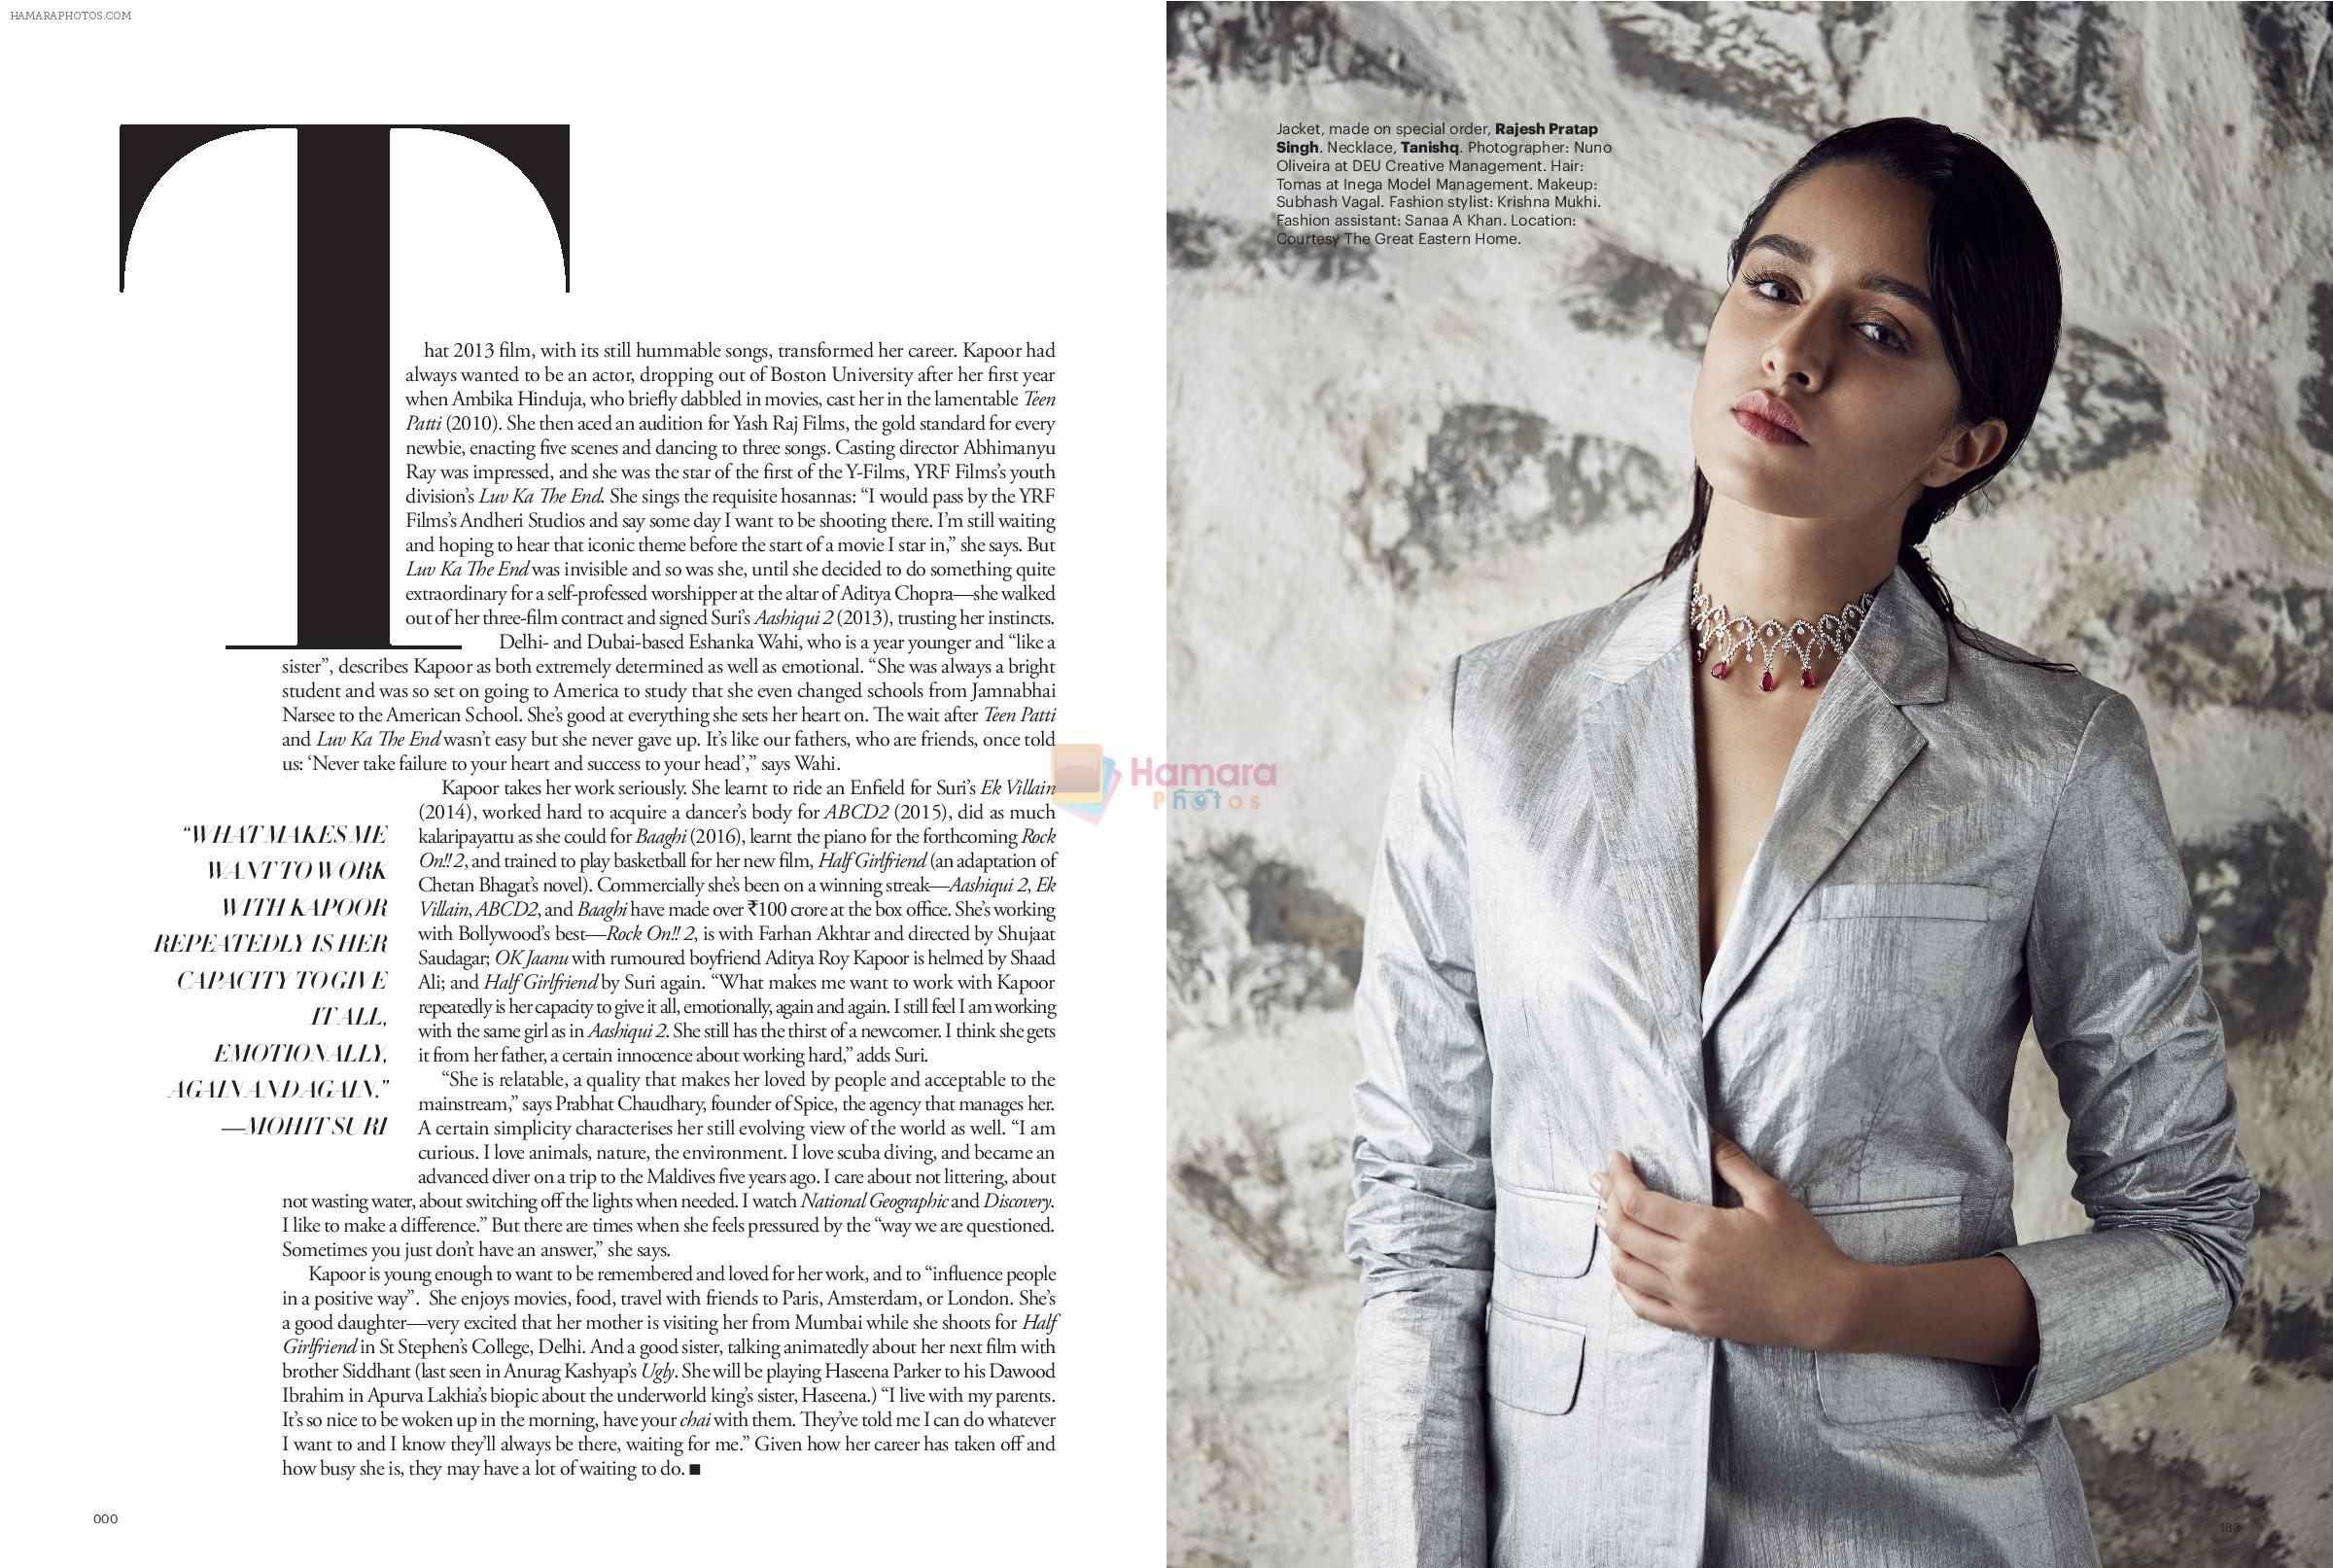 Shraddha Kapoor at the Cover Story on Page 3 of Harper's Bazaar July 2016